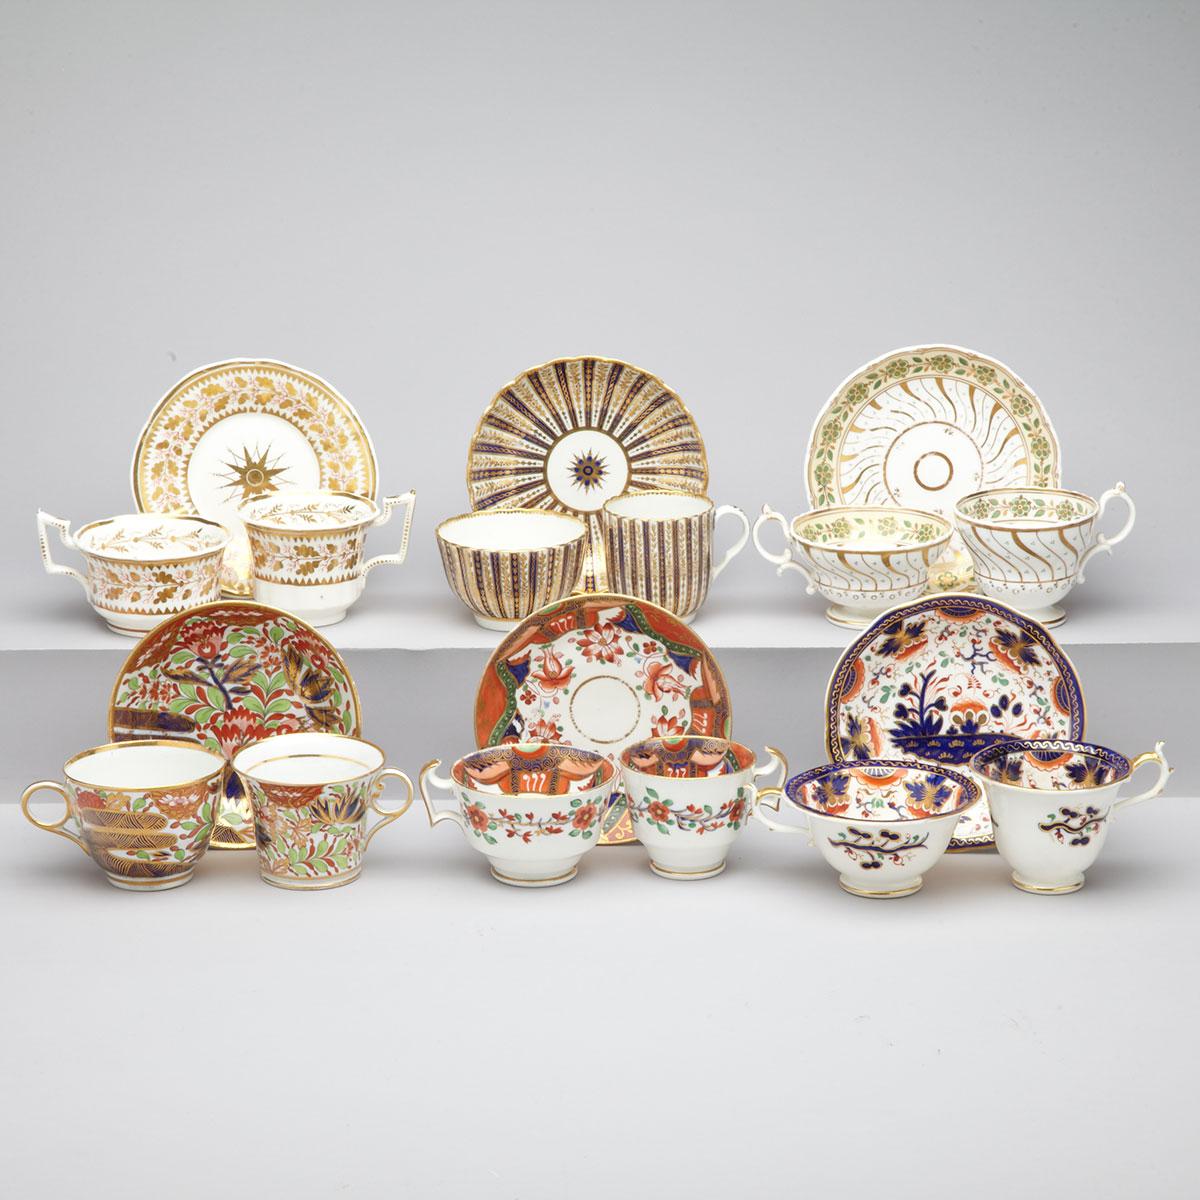 Six Various English Porcelain Trios, late 18th/early 19th century